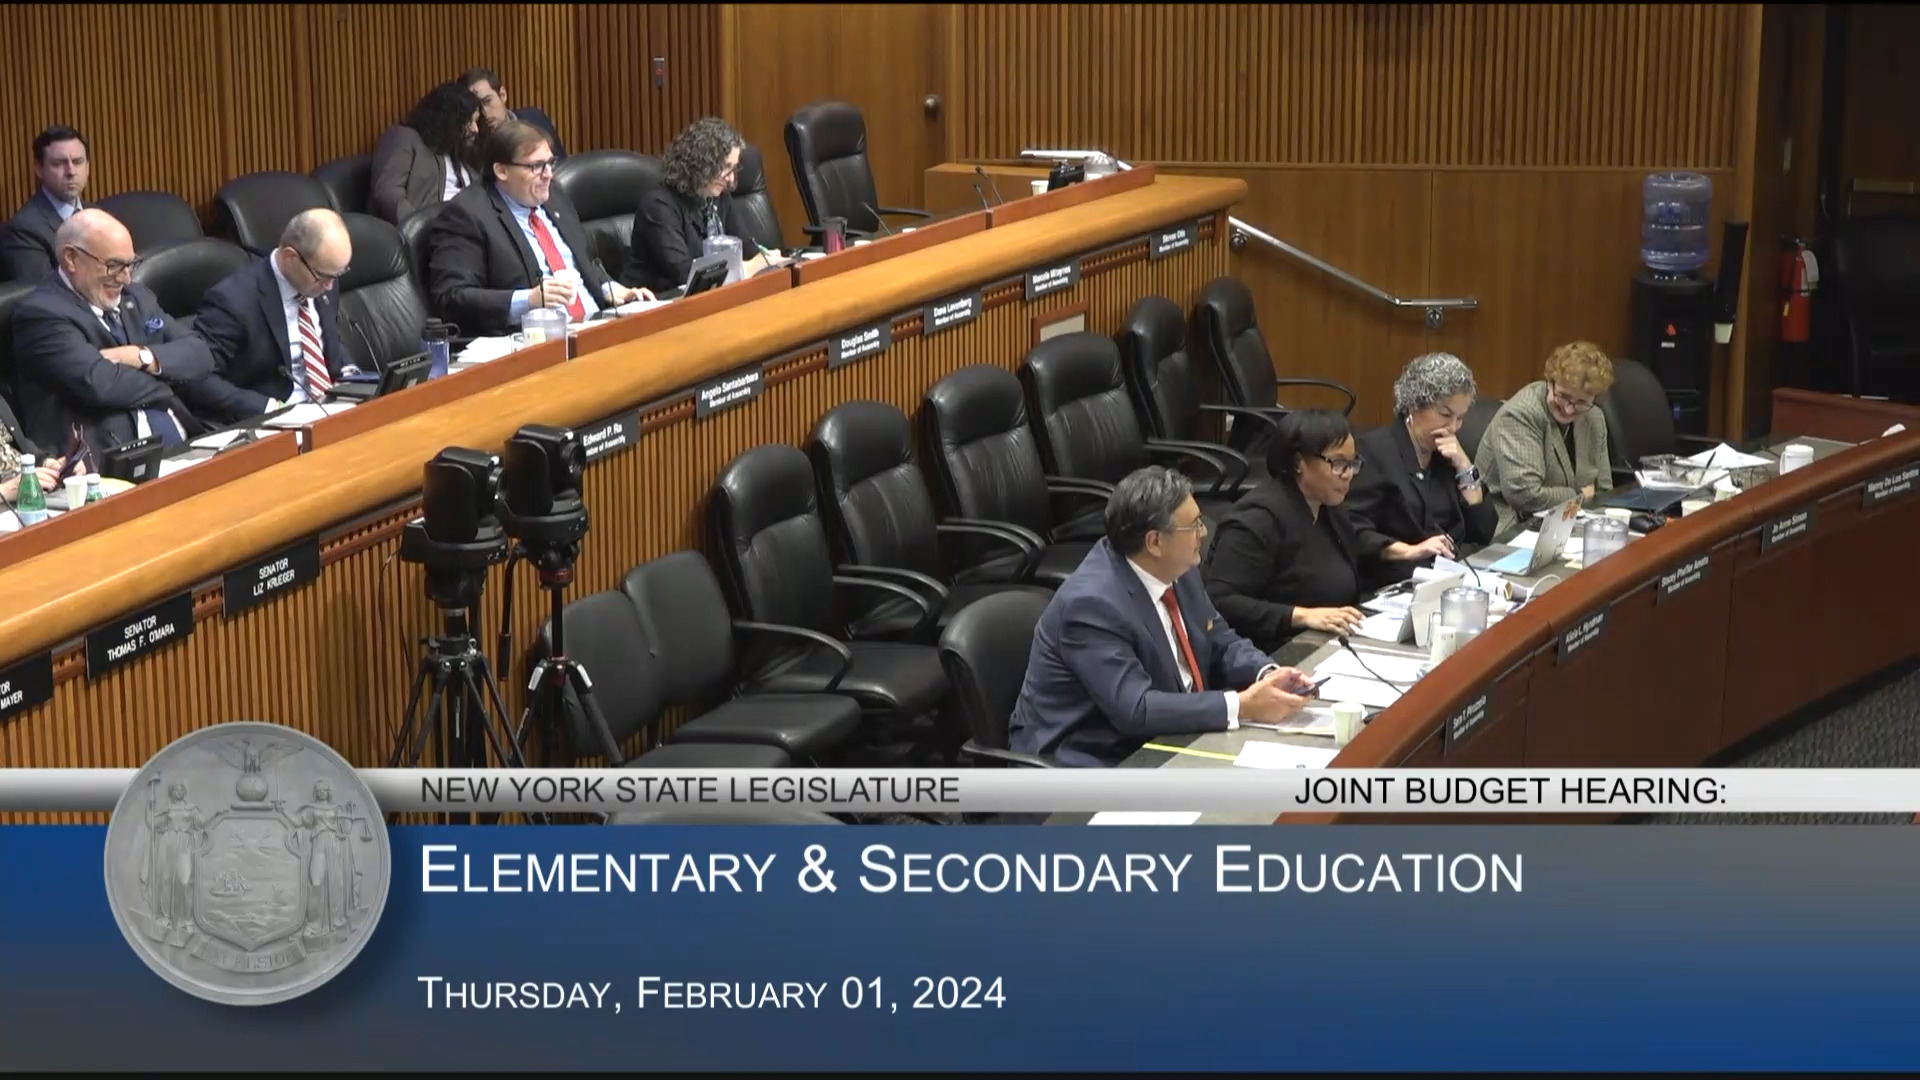 Teachers Union Officials Testify During Budget Hearing on Elementary and Secondary Education